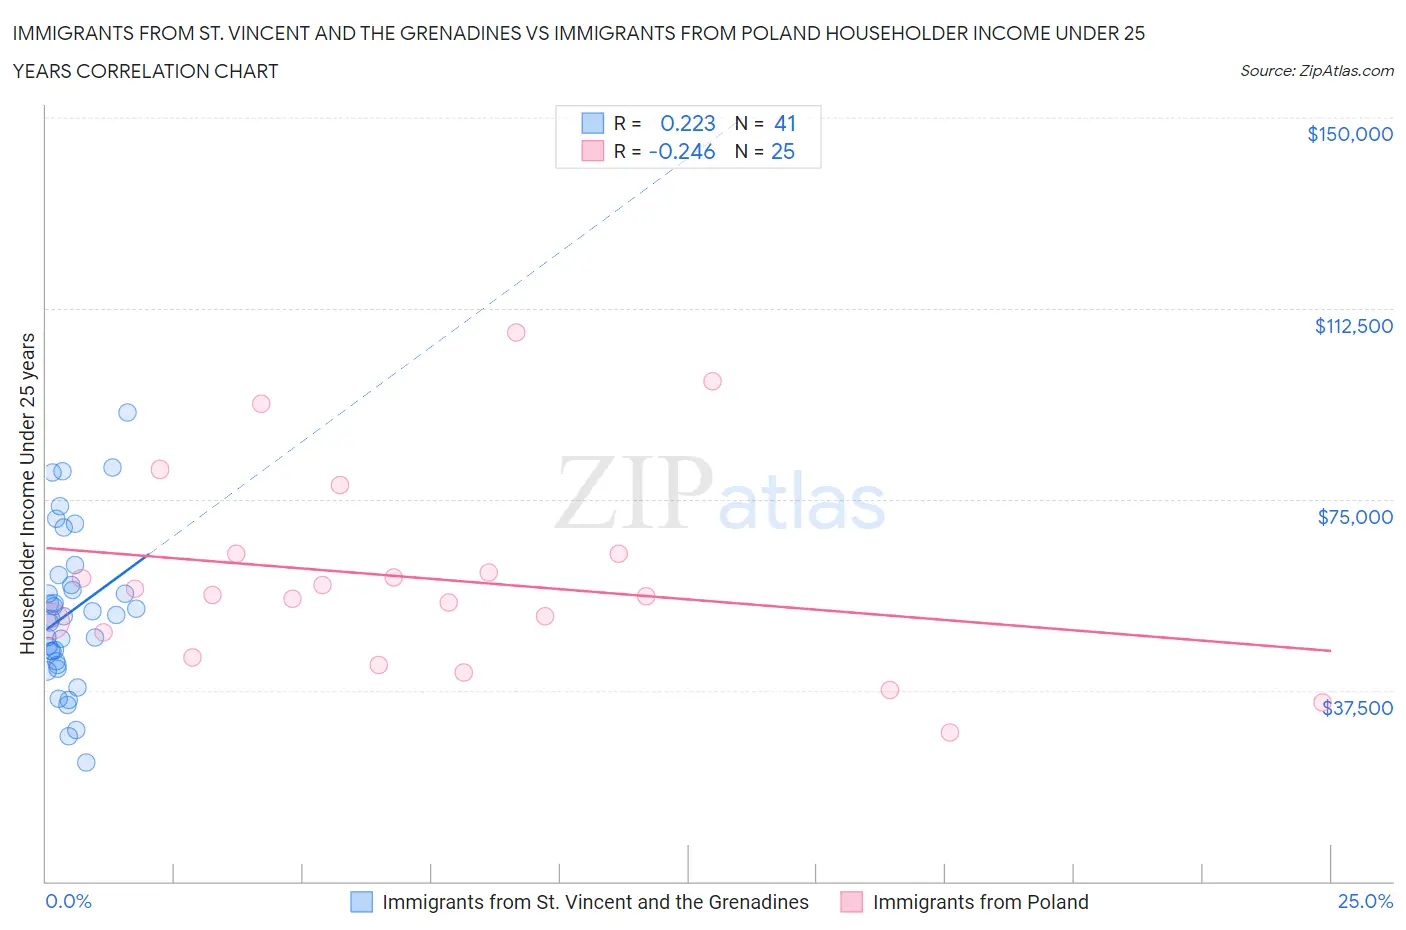 Immigrants from St. Vincent and the Grenadines vs Immigrants from Poland Householder Income Under 25 years